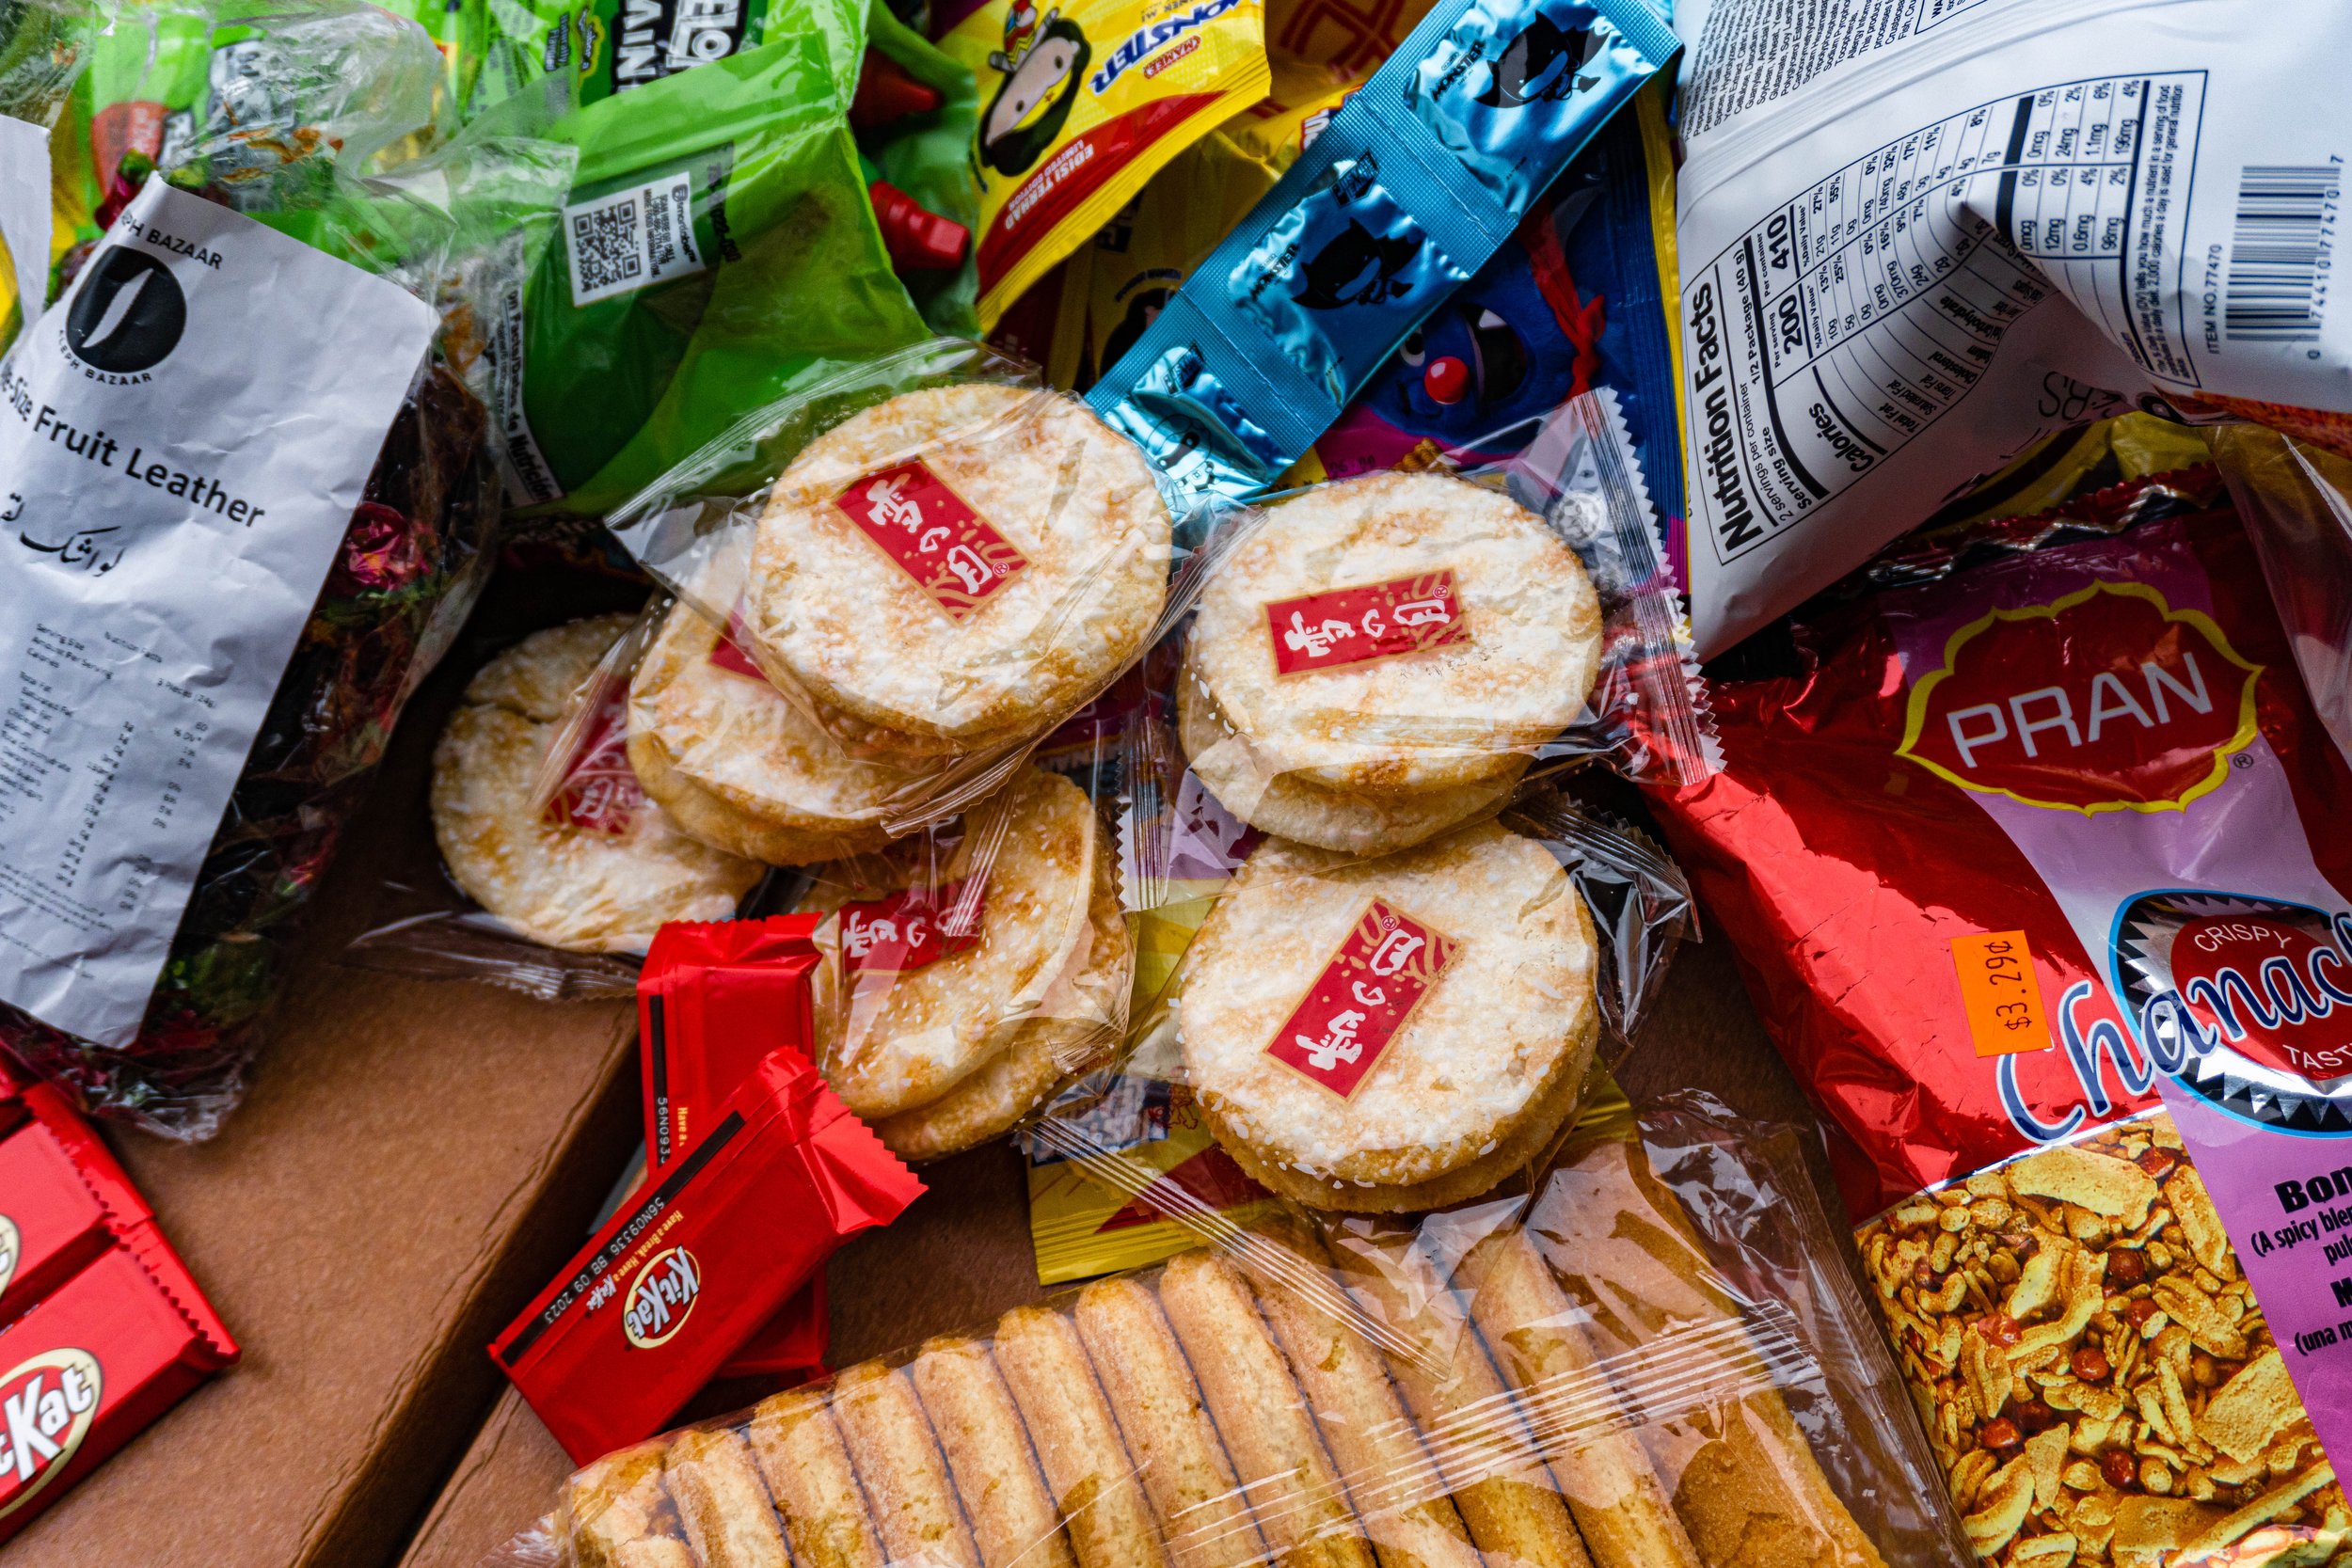  On Oct. 5, 2022, the Santa Monica College International Student Forum gathered together and exchanged snacks from all around the world for Snacks Appreciation Day, by the Cayton Center Balcony. Ranging from Mexico, Bangladesh, Malaysia, Iran, Taiwan